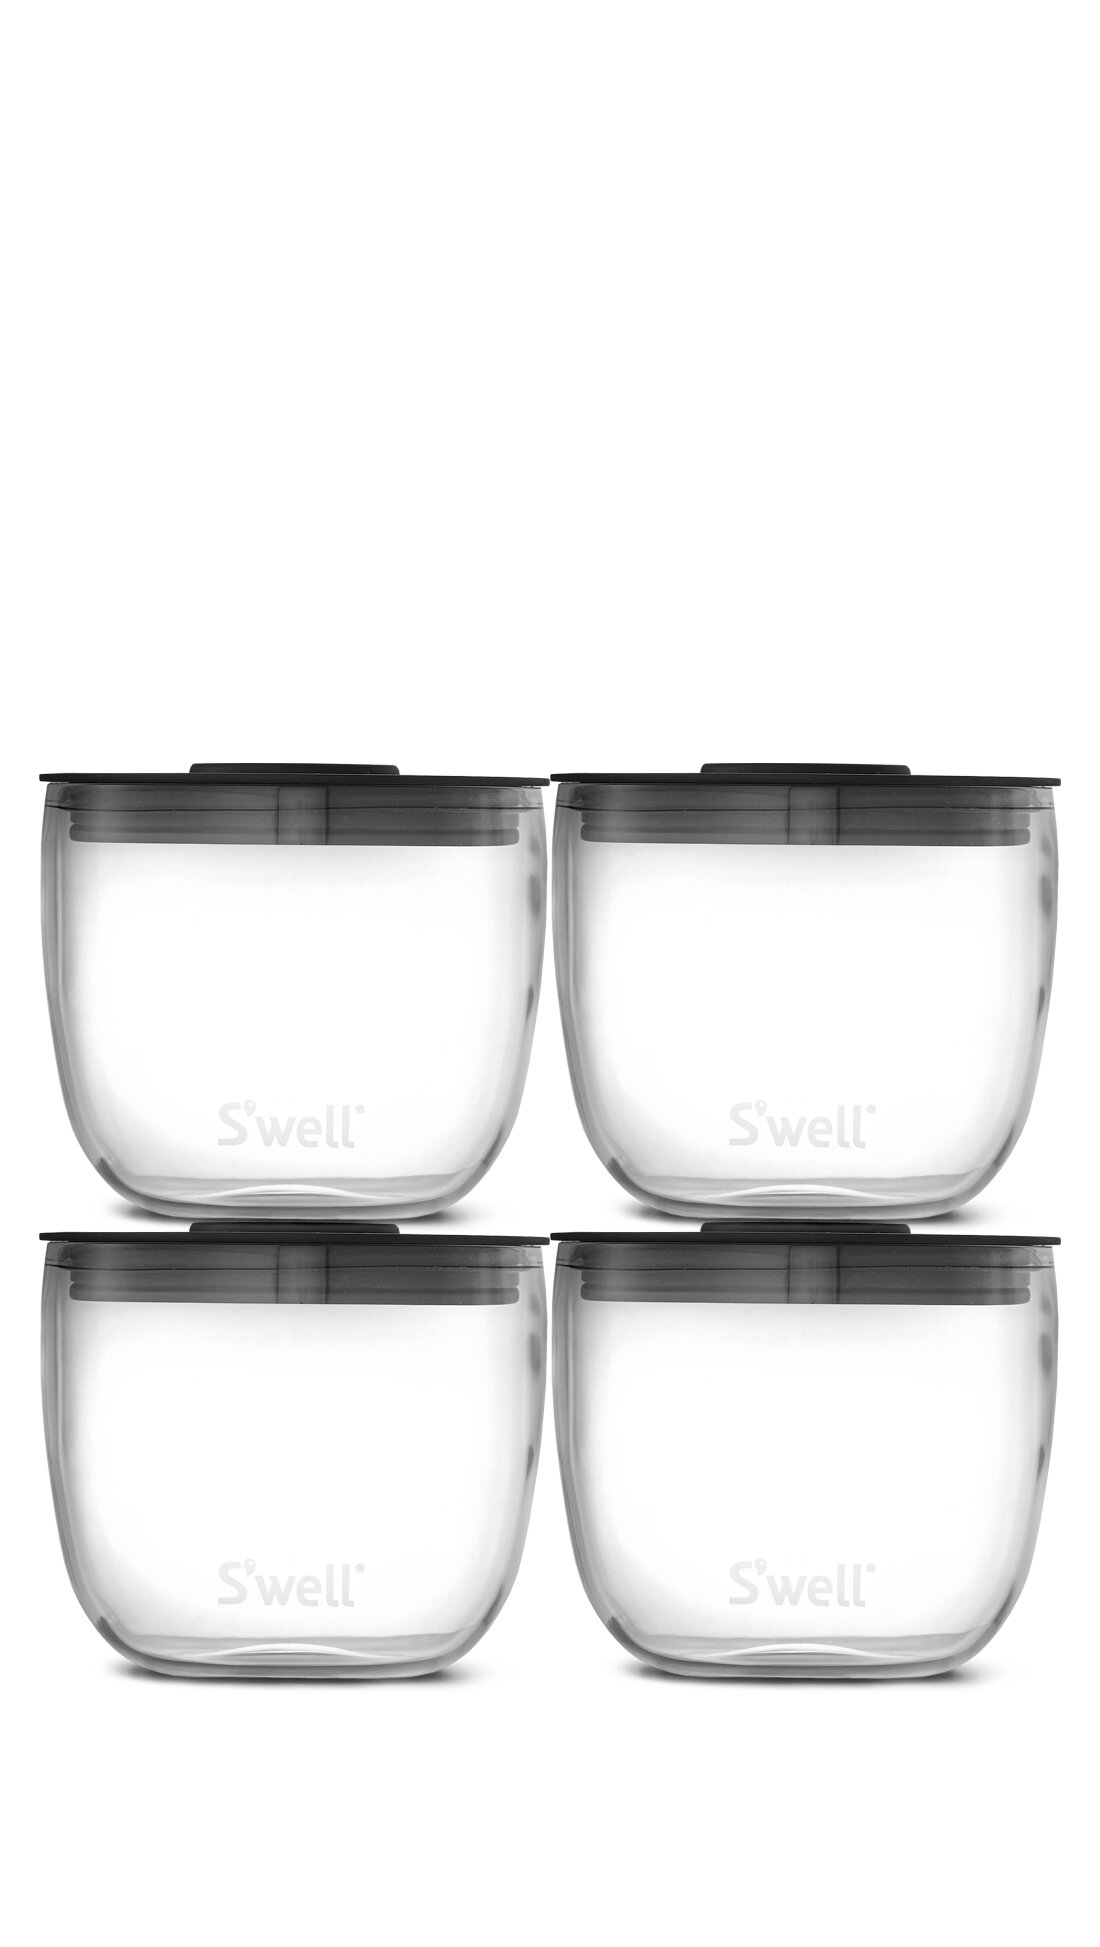  S'well 12810-B19-39300 Tritan Eats 2-in-1 Nesting Food Bowls,  10oz, Clear: Home & Kitchen